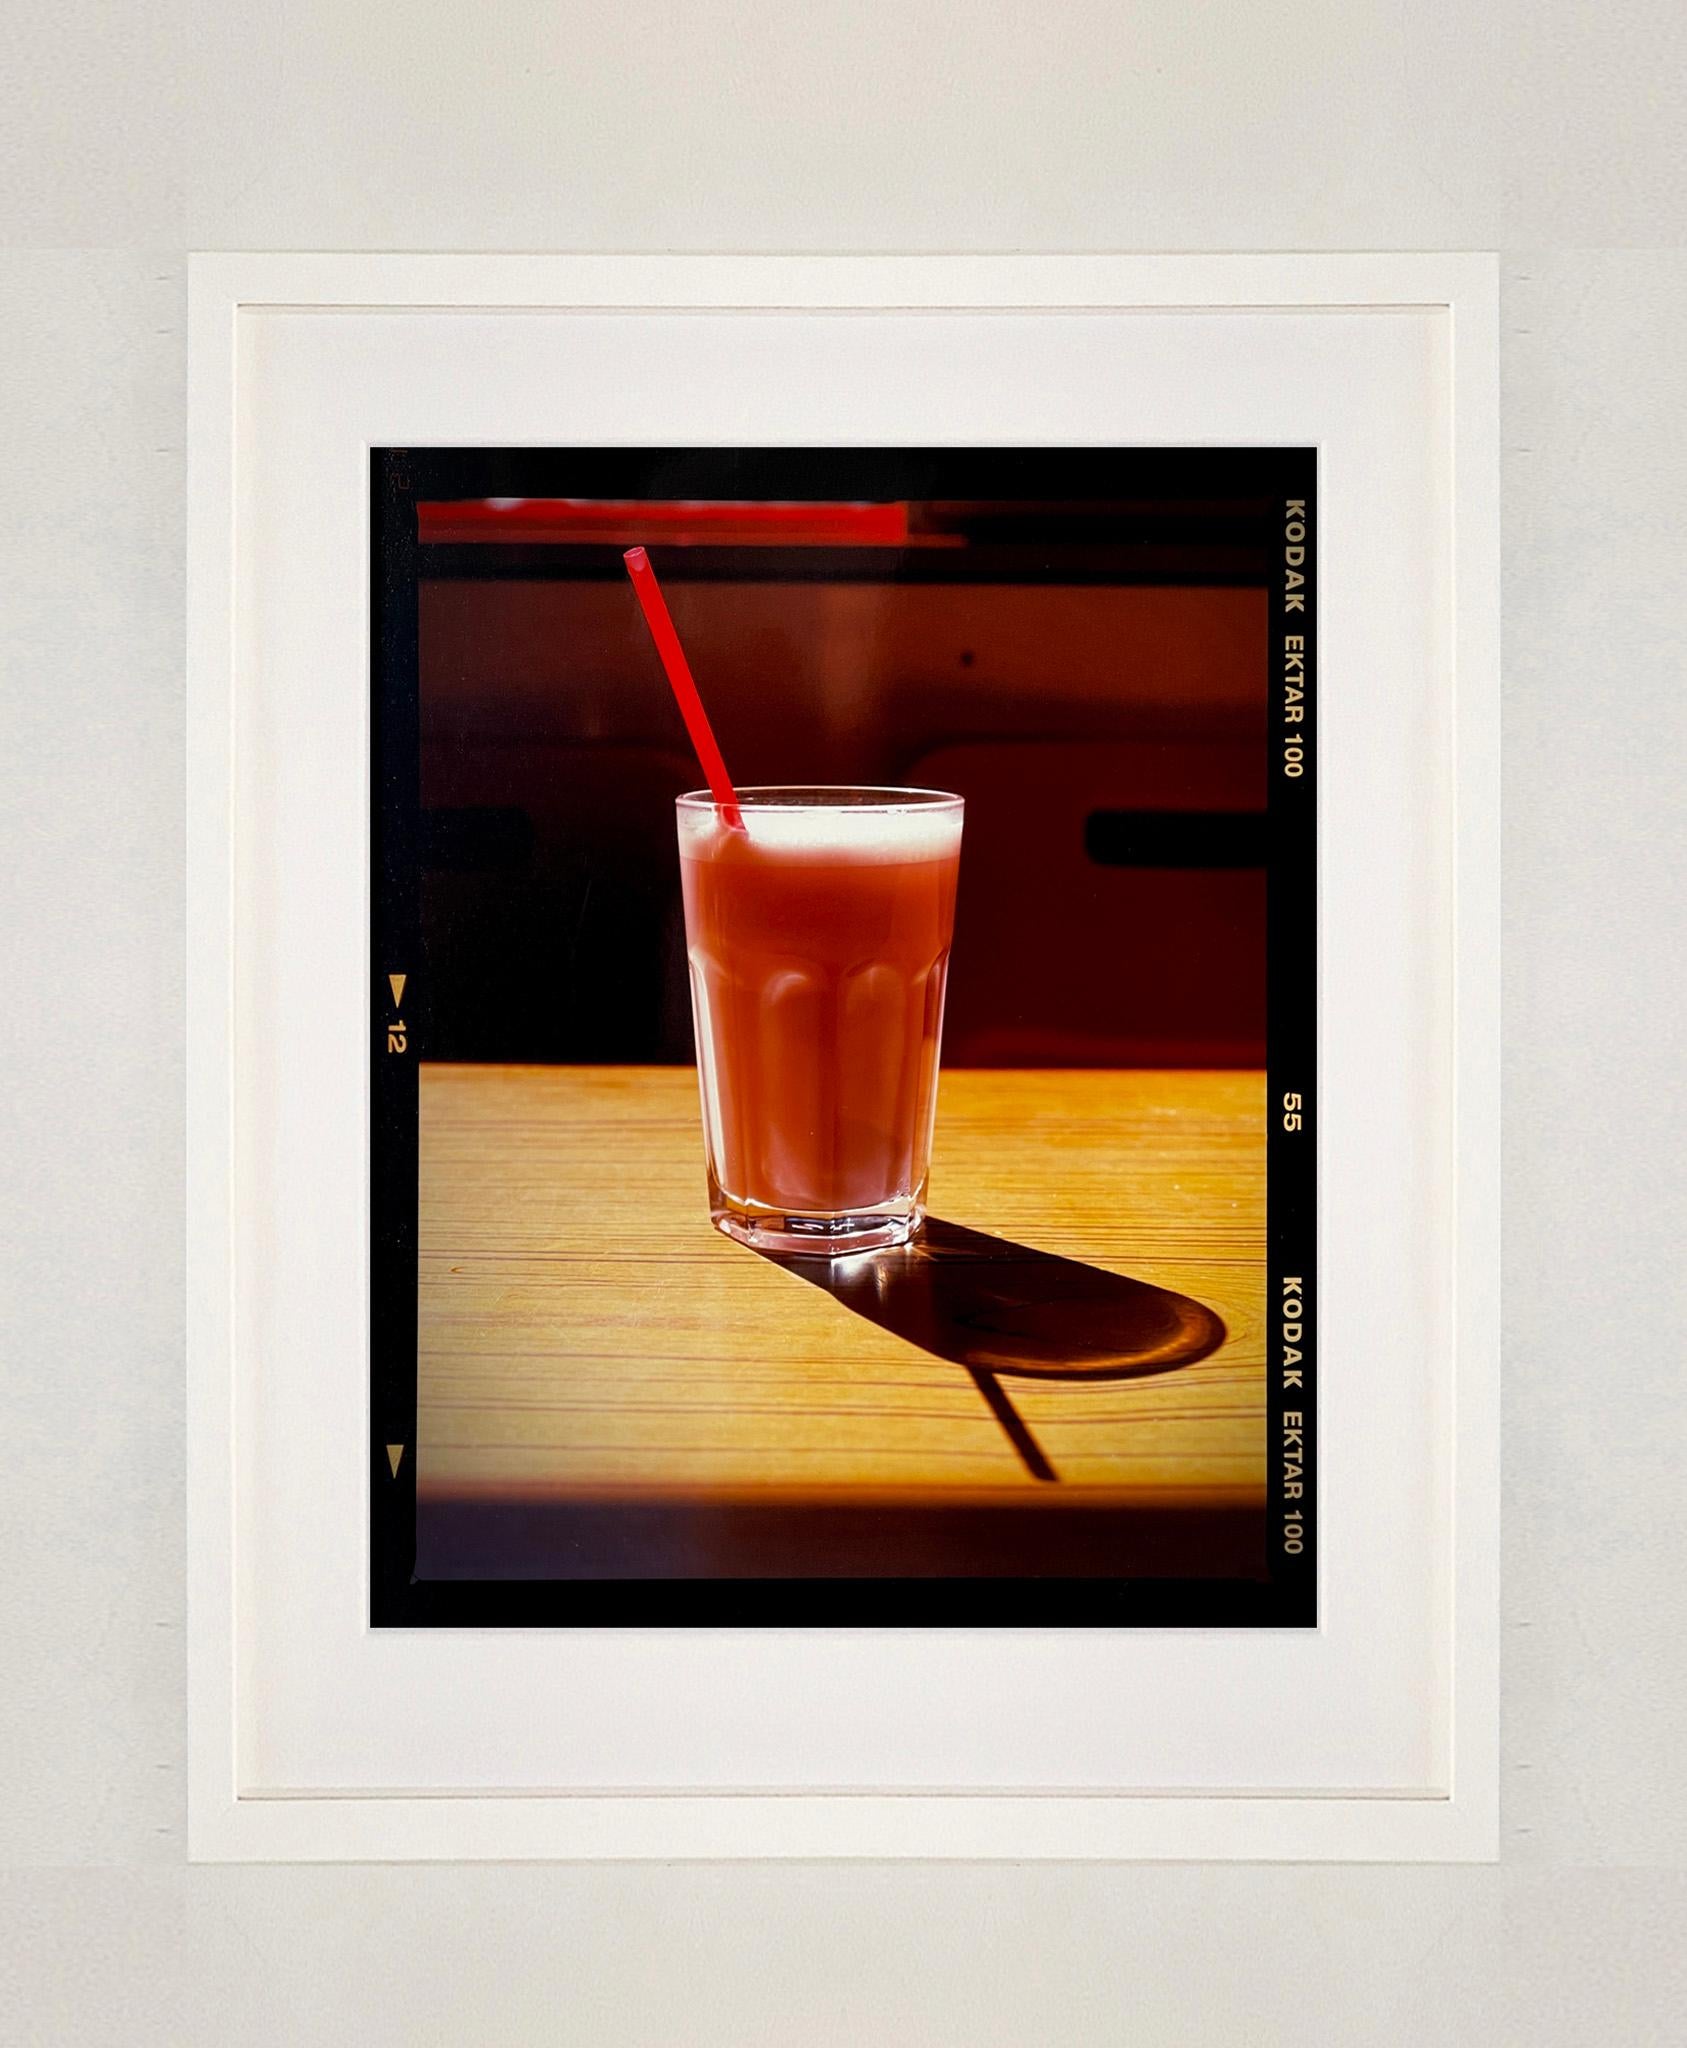 Milkshake, a cold drink on a hot day, captured at the seaside in the year of the great British staycation. This enticing pink milkshake in a glistening glass was photographed by Richard Heeps in a Clacton-on-Sea cafe. The composition of this artwork